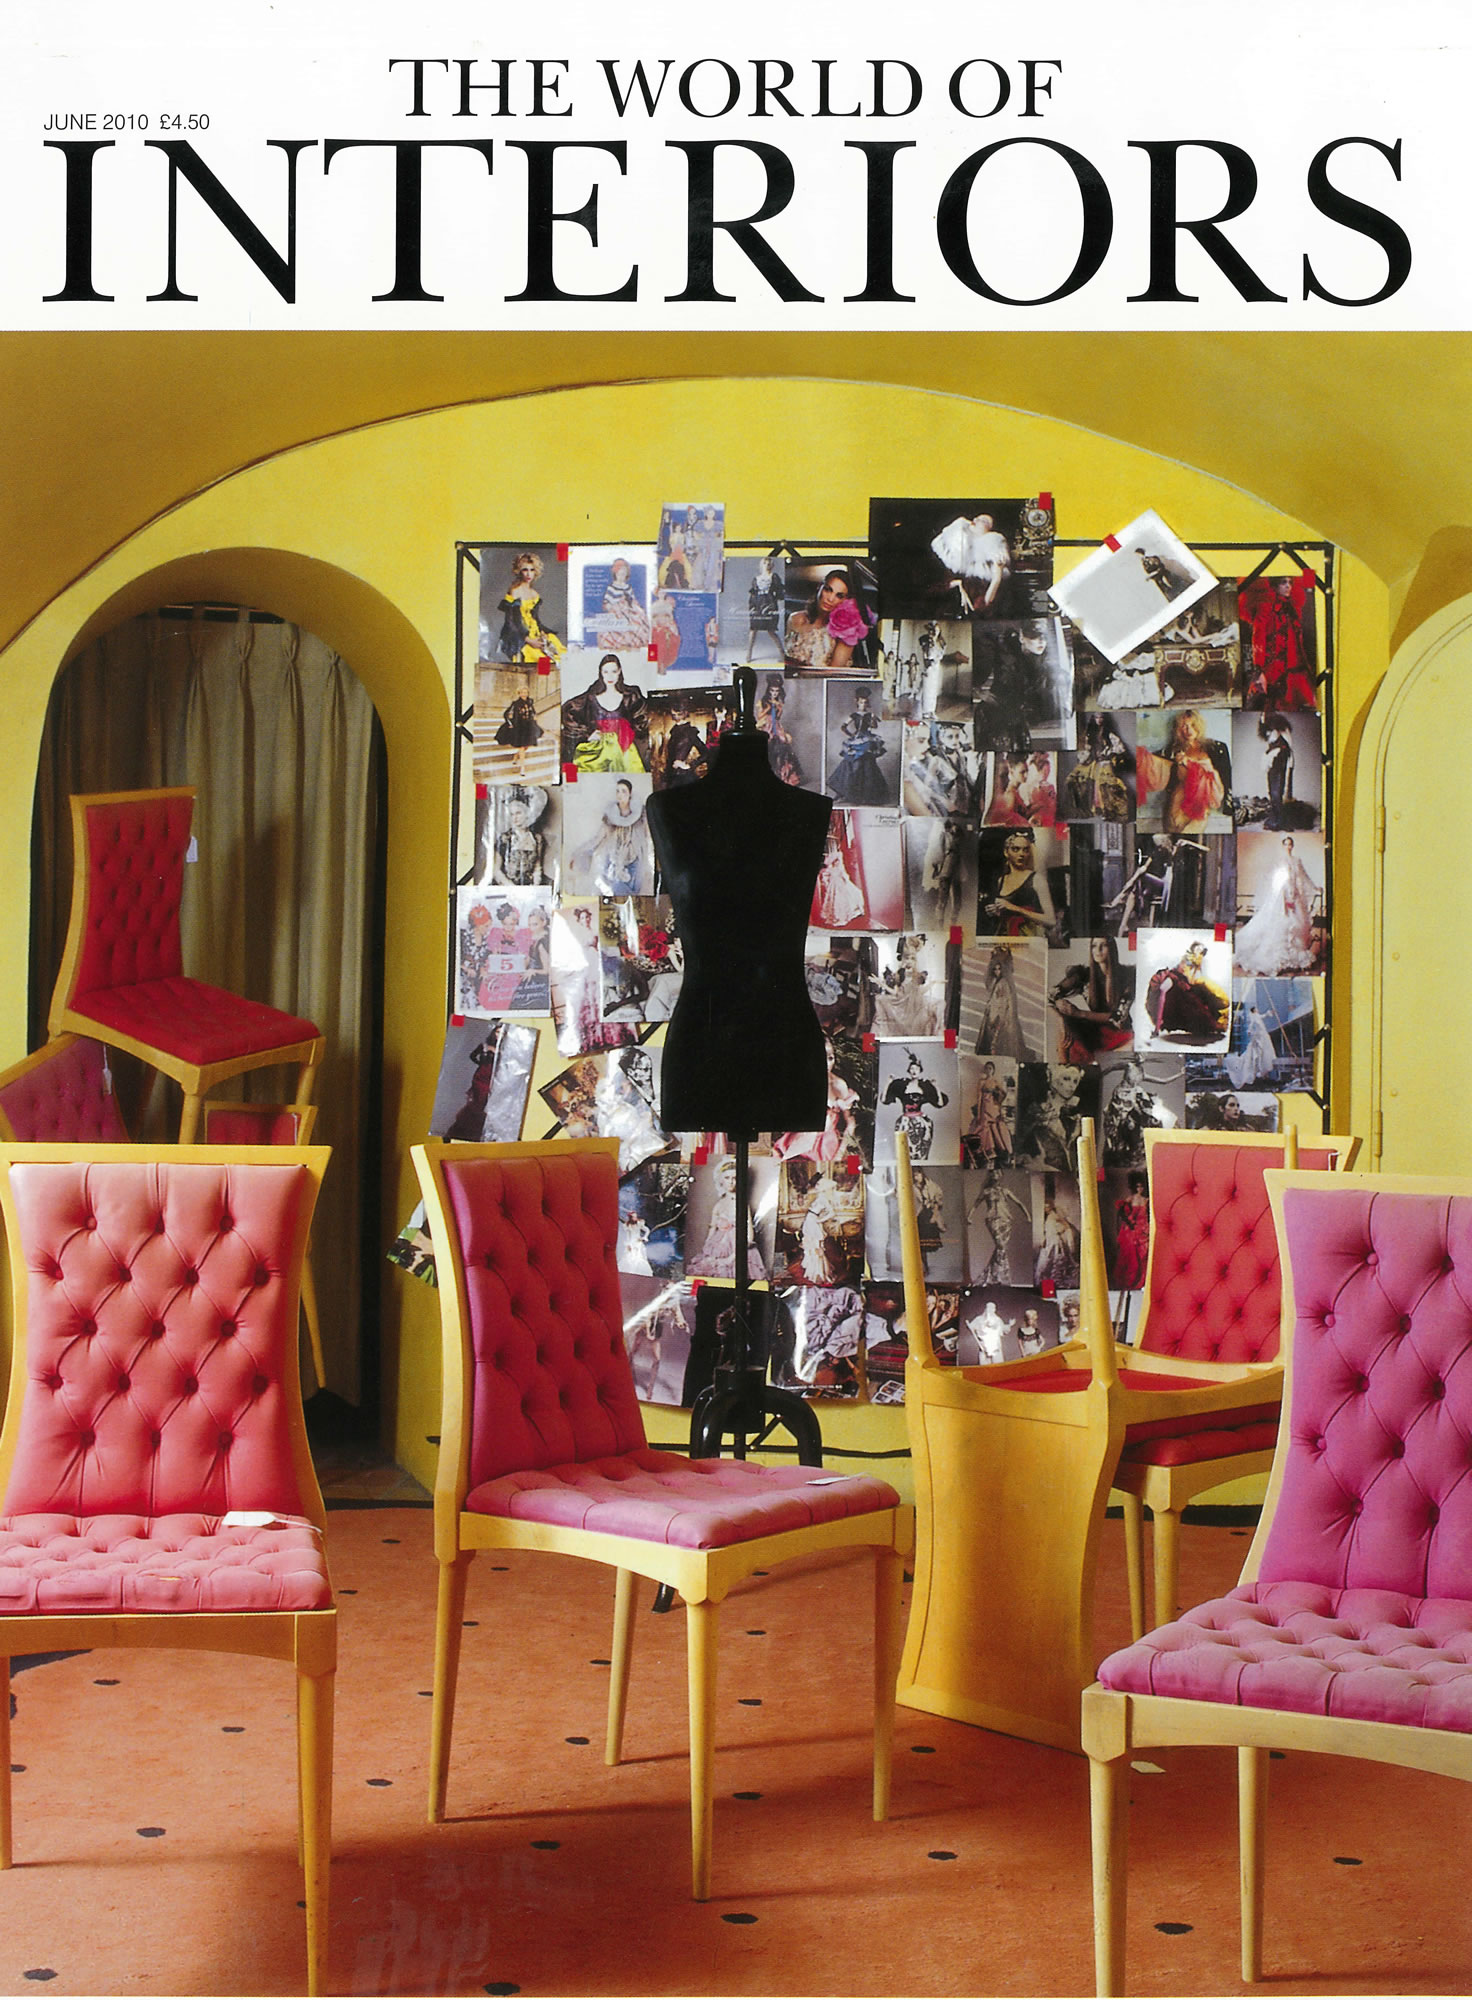 The World of Interiors FP June 2010